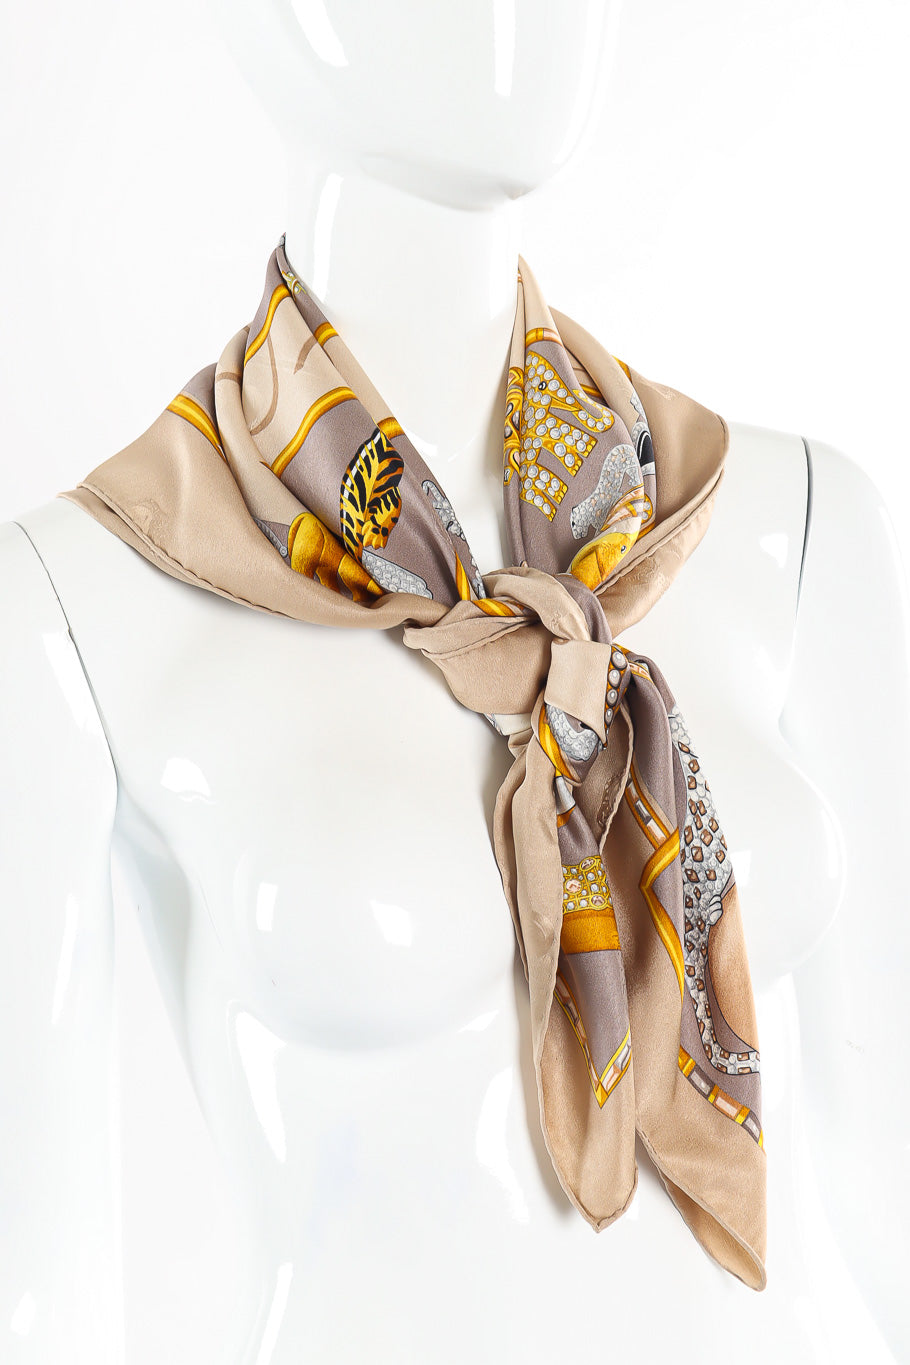 Jeweled accessory motif scarf by Cartier photo on Mannequin. @recessla